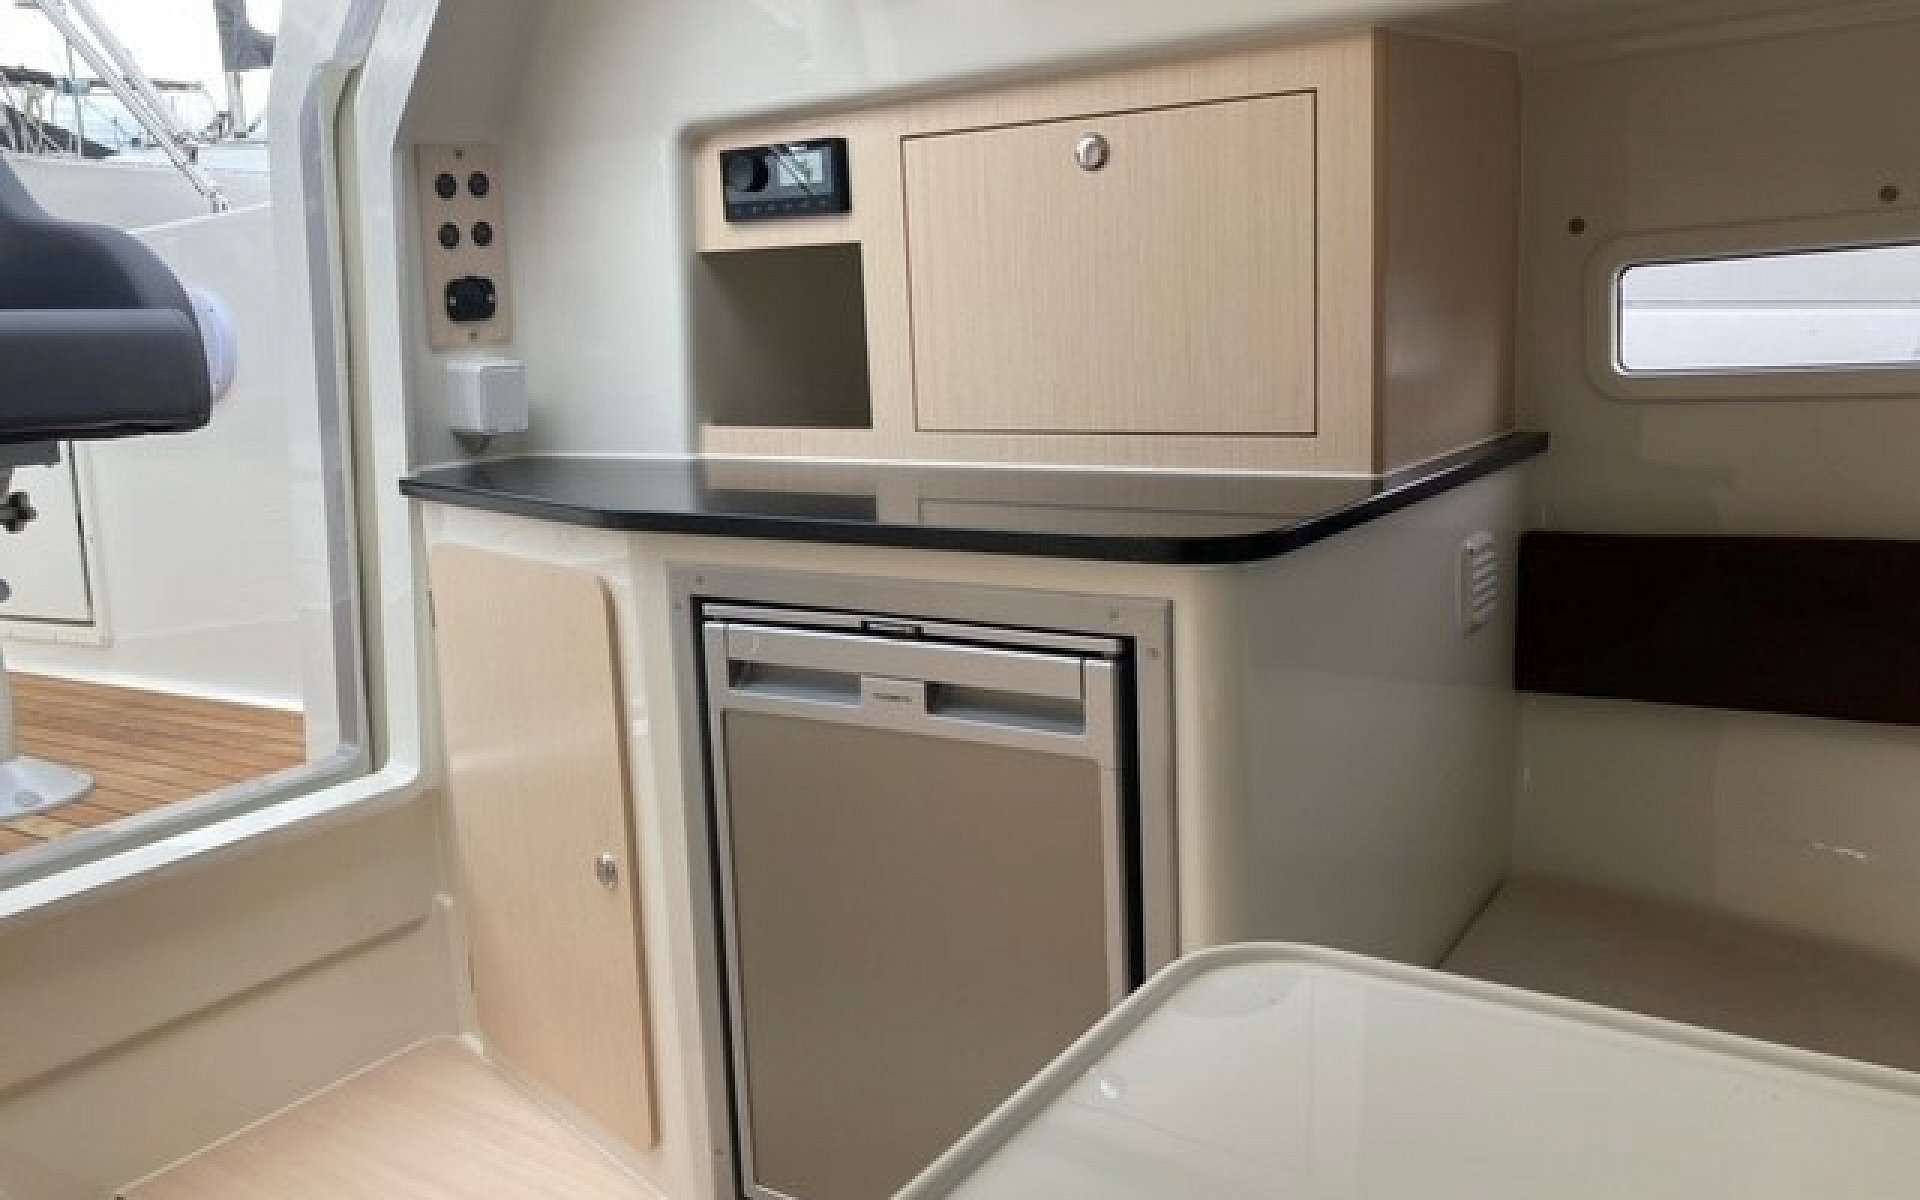 ATLANTIC 730 SUN CRUISER galley image new boats for sale in UK 